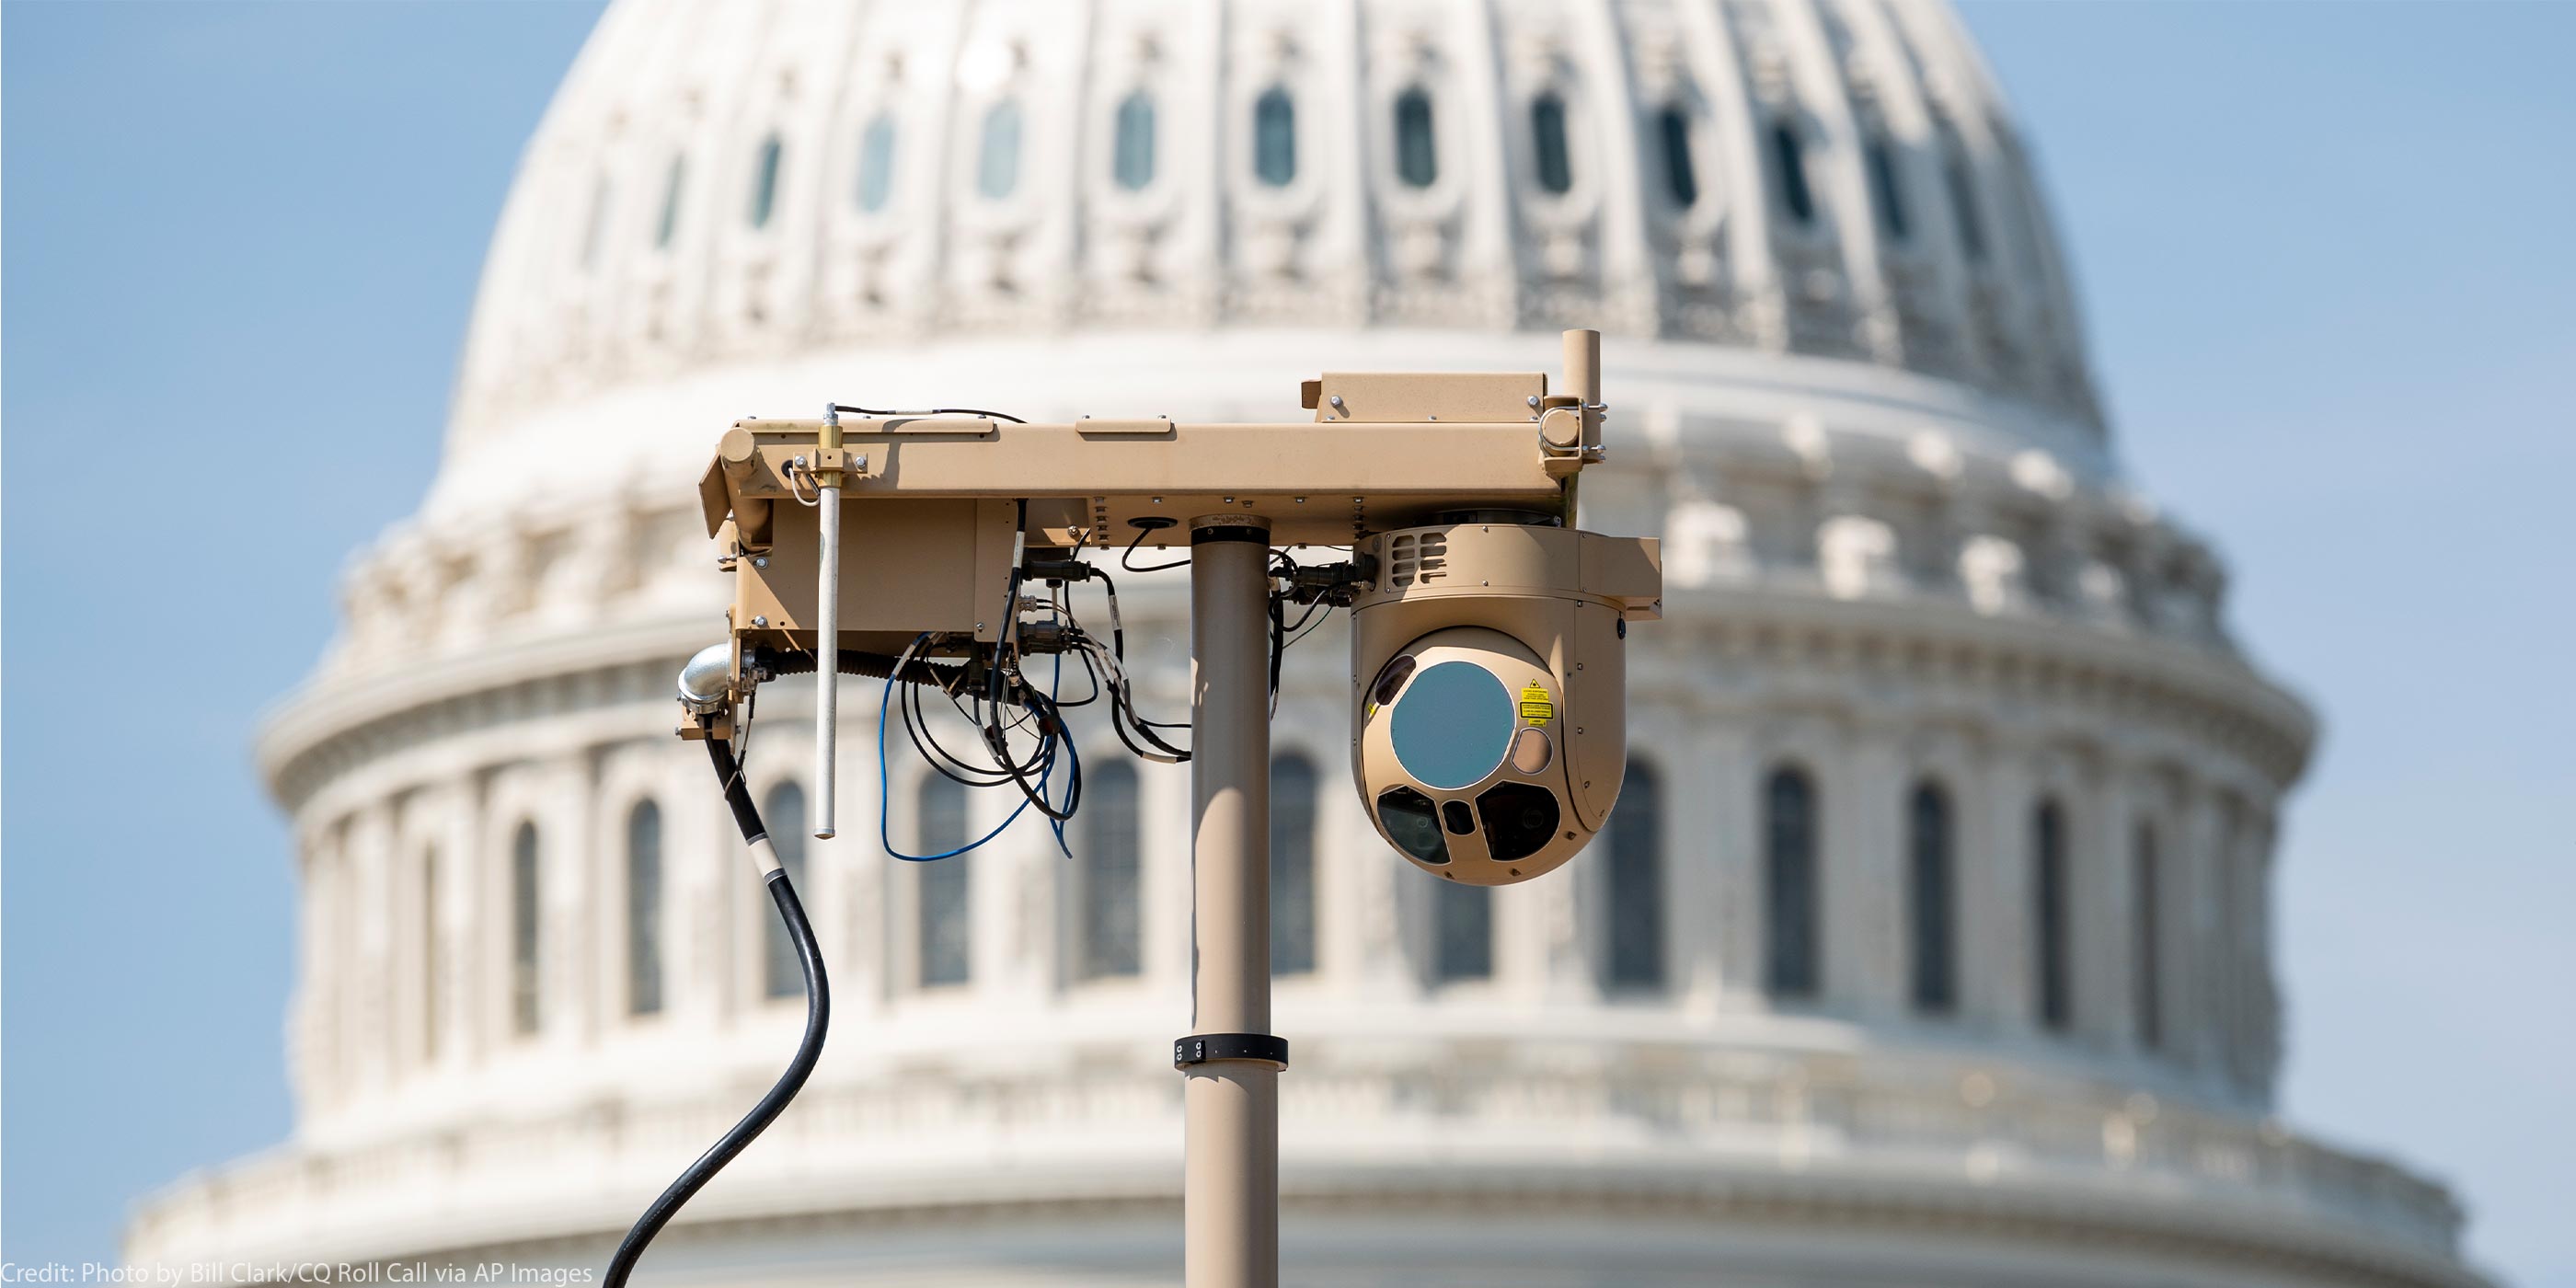 Six Questions to Ask Before Accepting a Surveillance Technology | News & Commentary